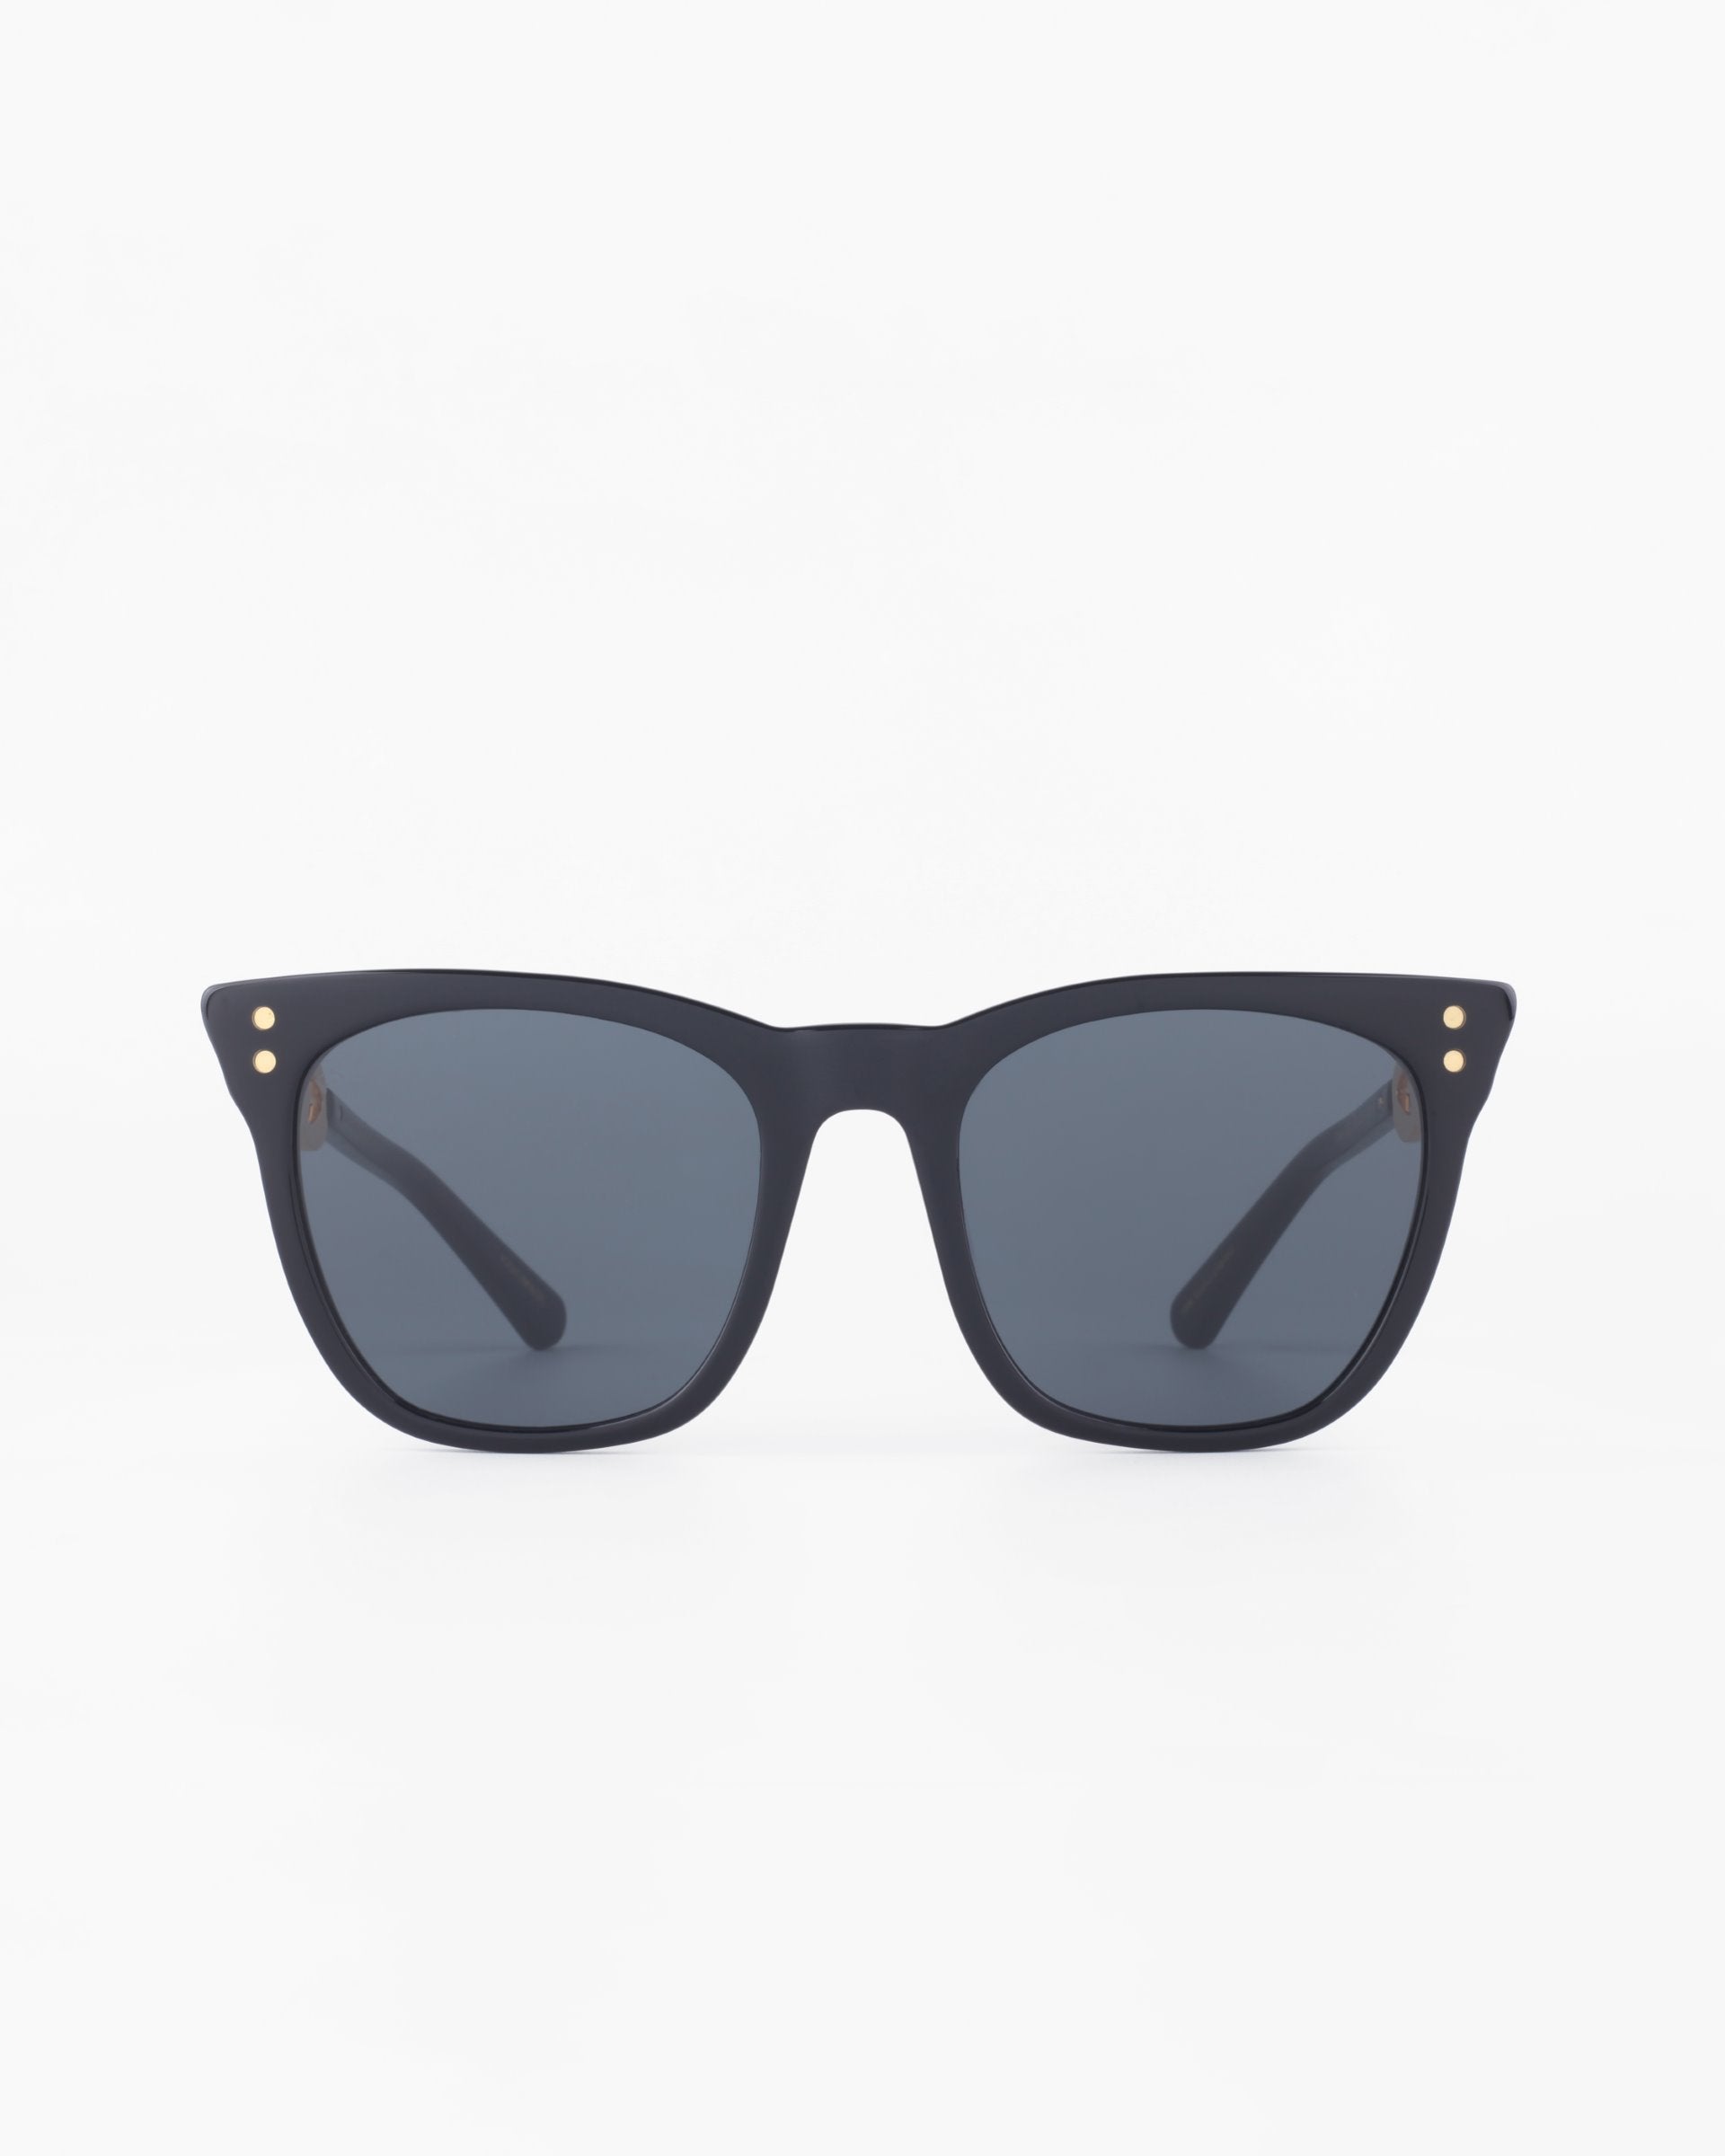 A pair of black square-frame acetate sunglasses with dark lenses. The Deco sunglasses by For Art&#39;s Sake® have three small dot accents on each corner of the frame. The background is plain white.